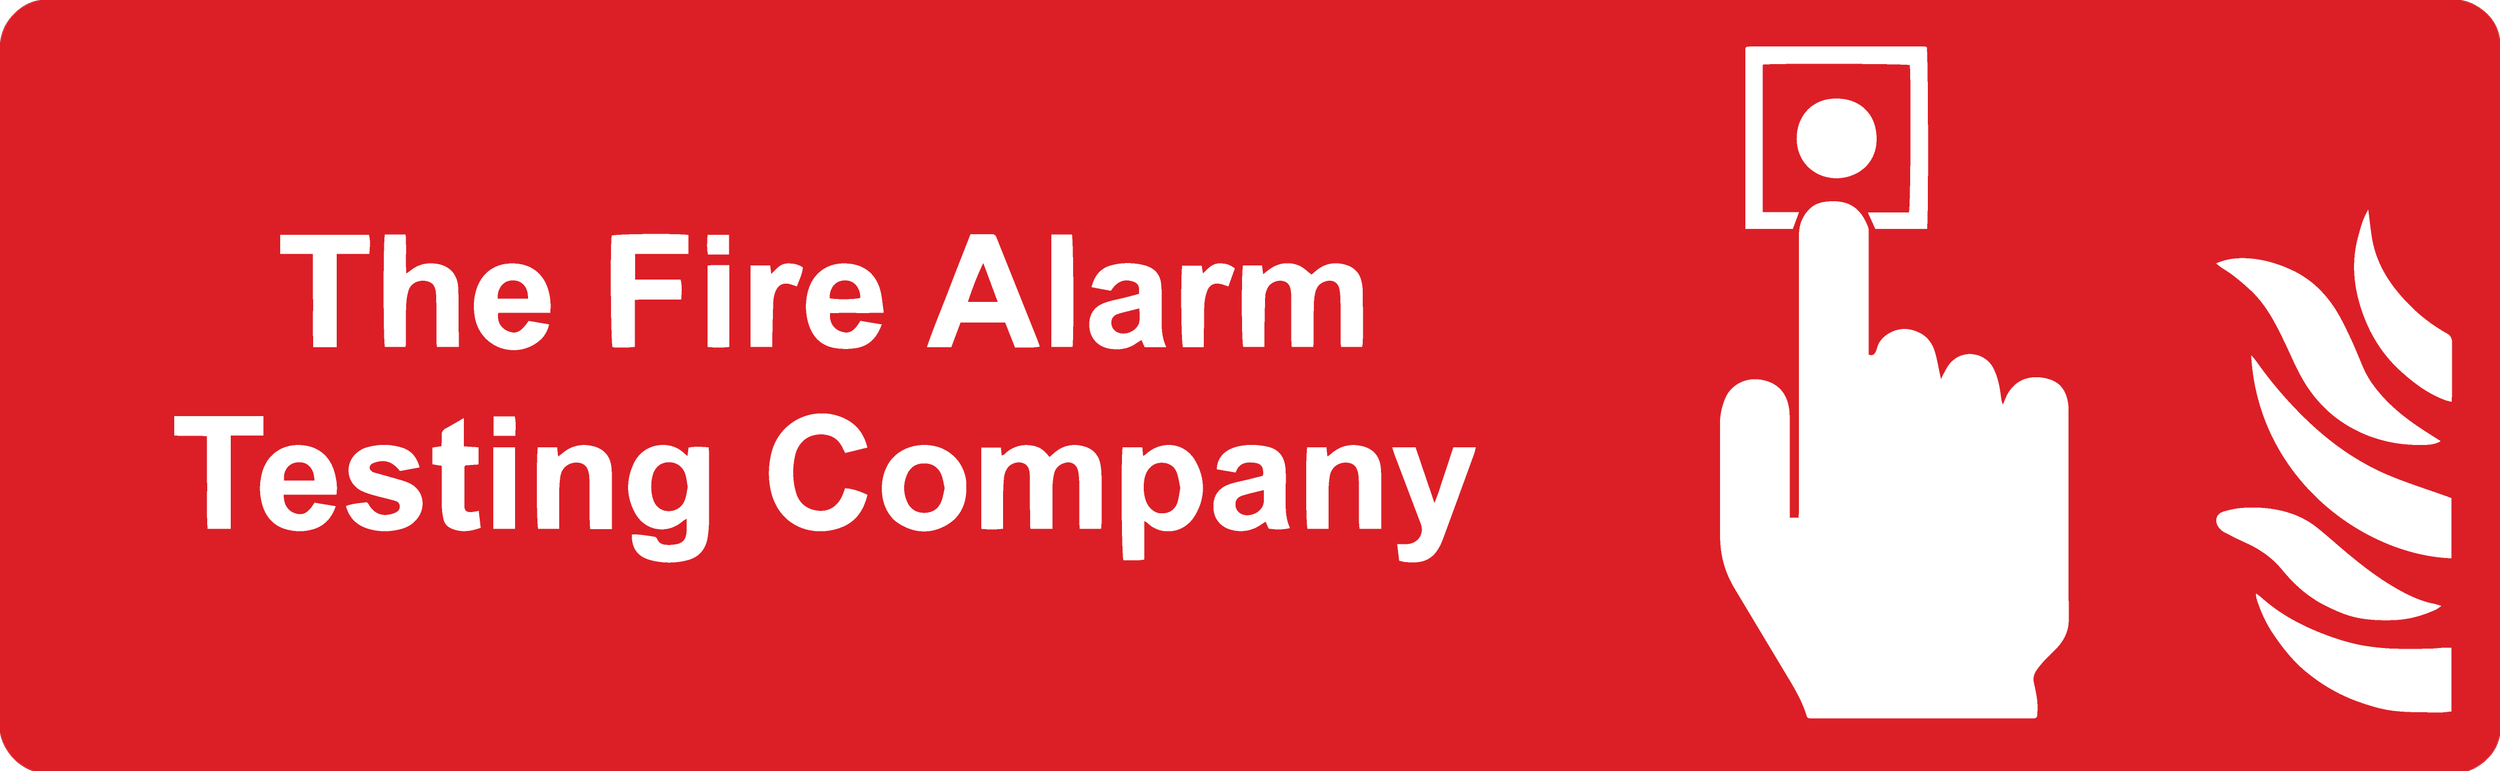 The Fire Alarm Testing Company | Fire &amp; Security Solutions